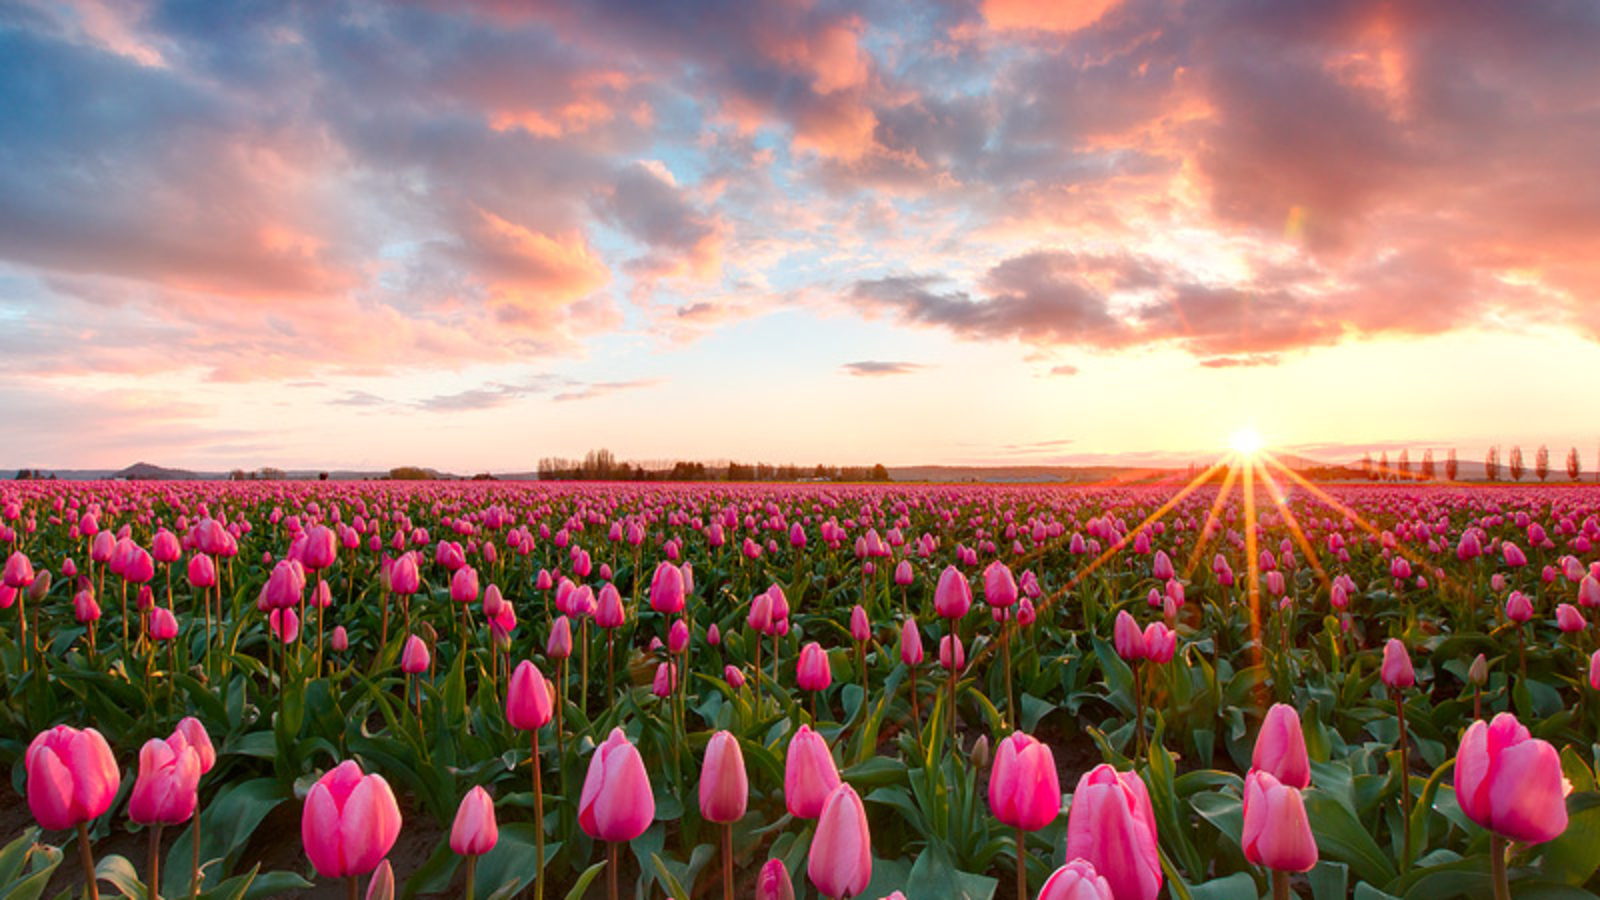 Tulips Photos Download The BEST Free Tulips Stock Photos  HD Images